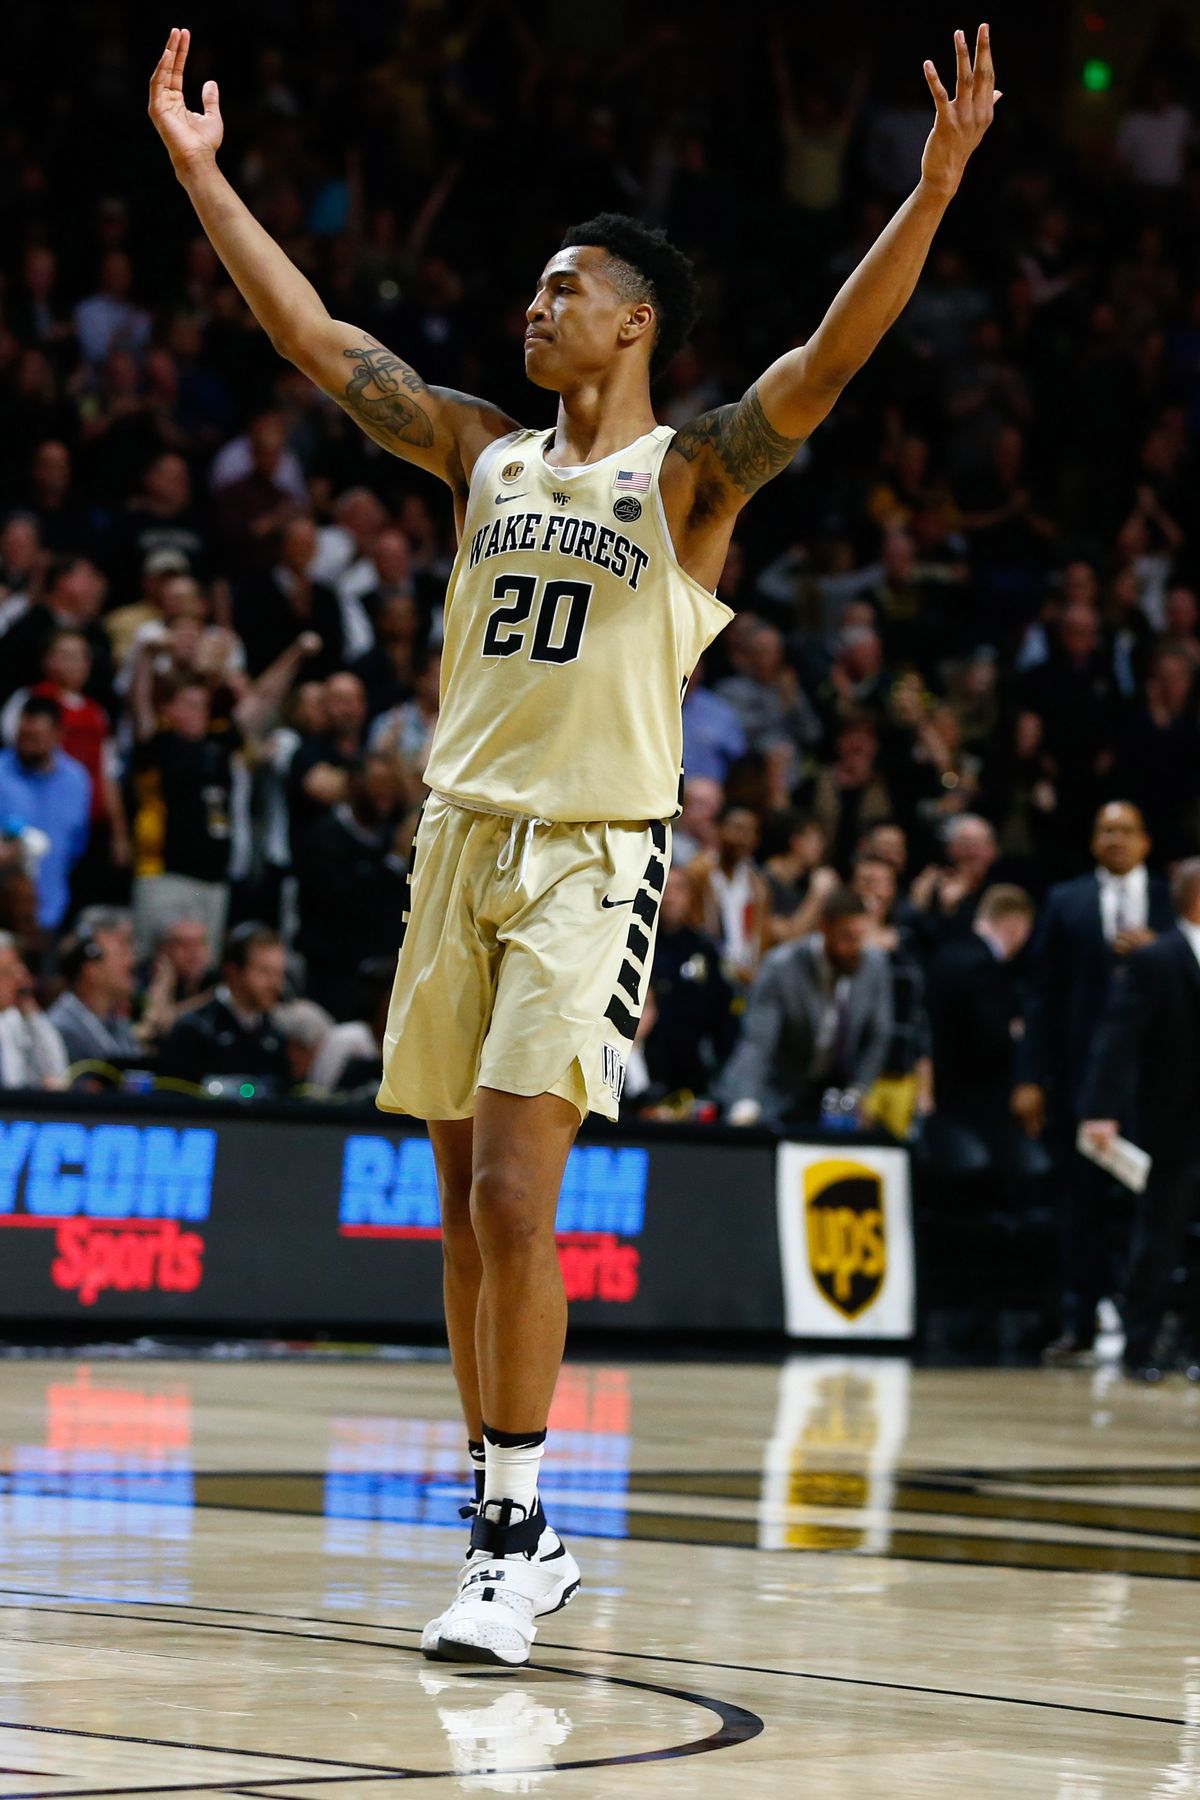 NCAA Basketball: Pittsburgh at Wake Forest